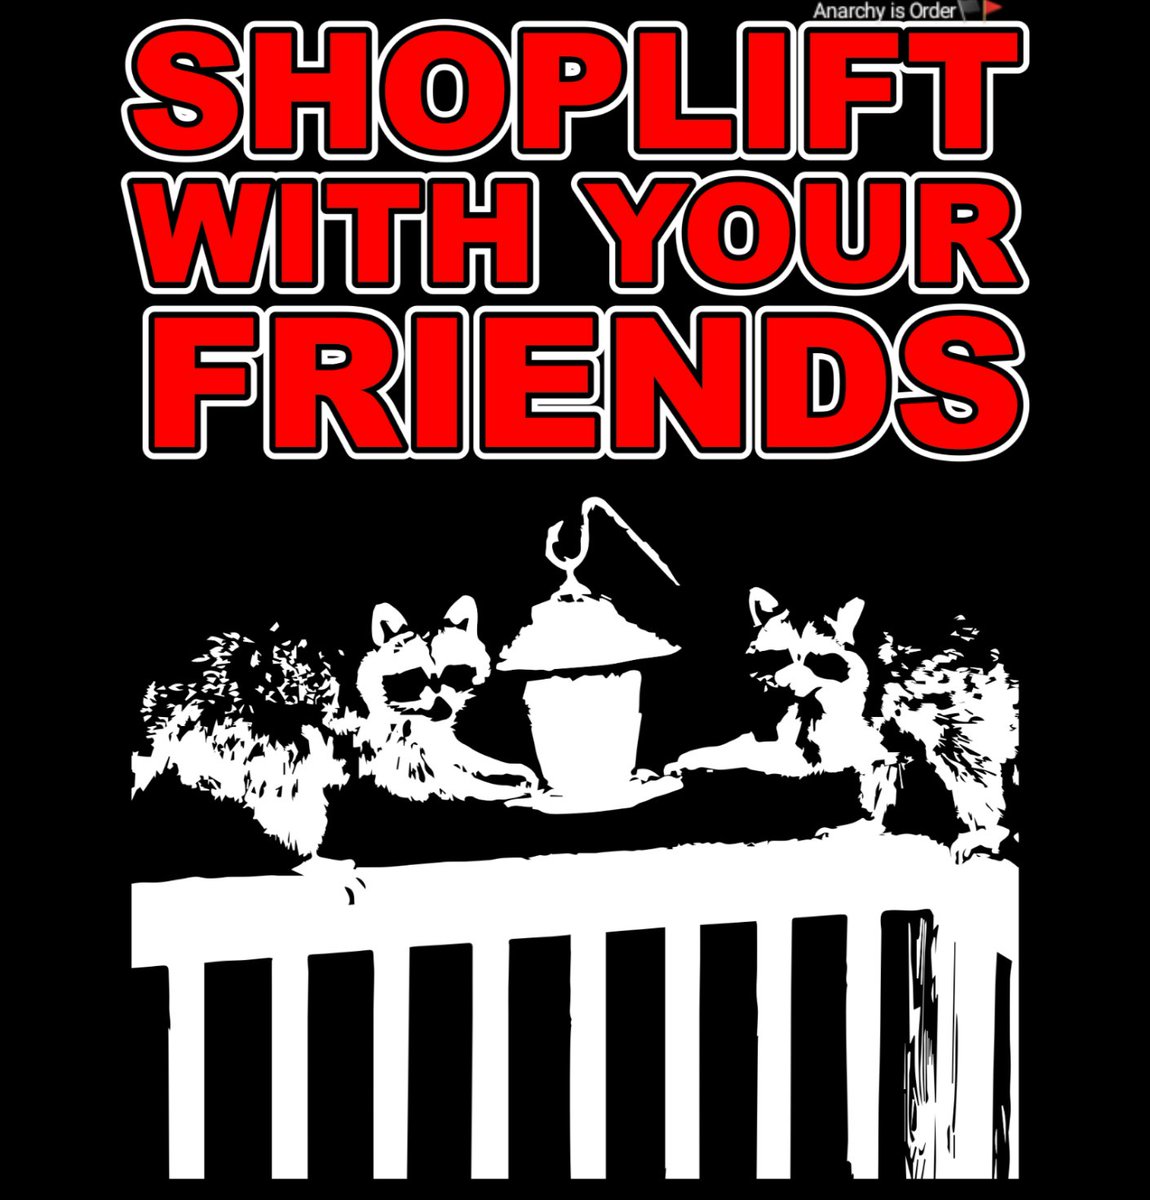 If you see someone shoplifting 
No you didn’t 
Don’t be a snitch fuck the system